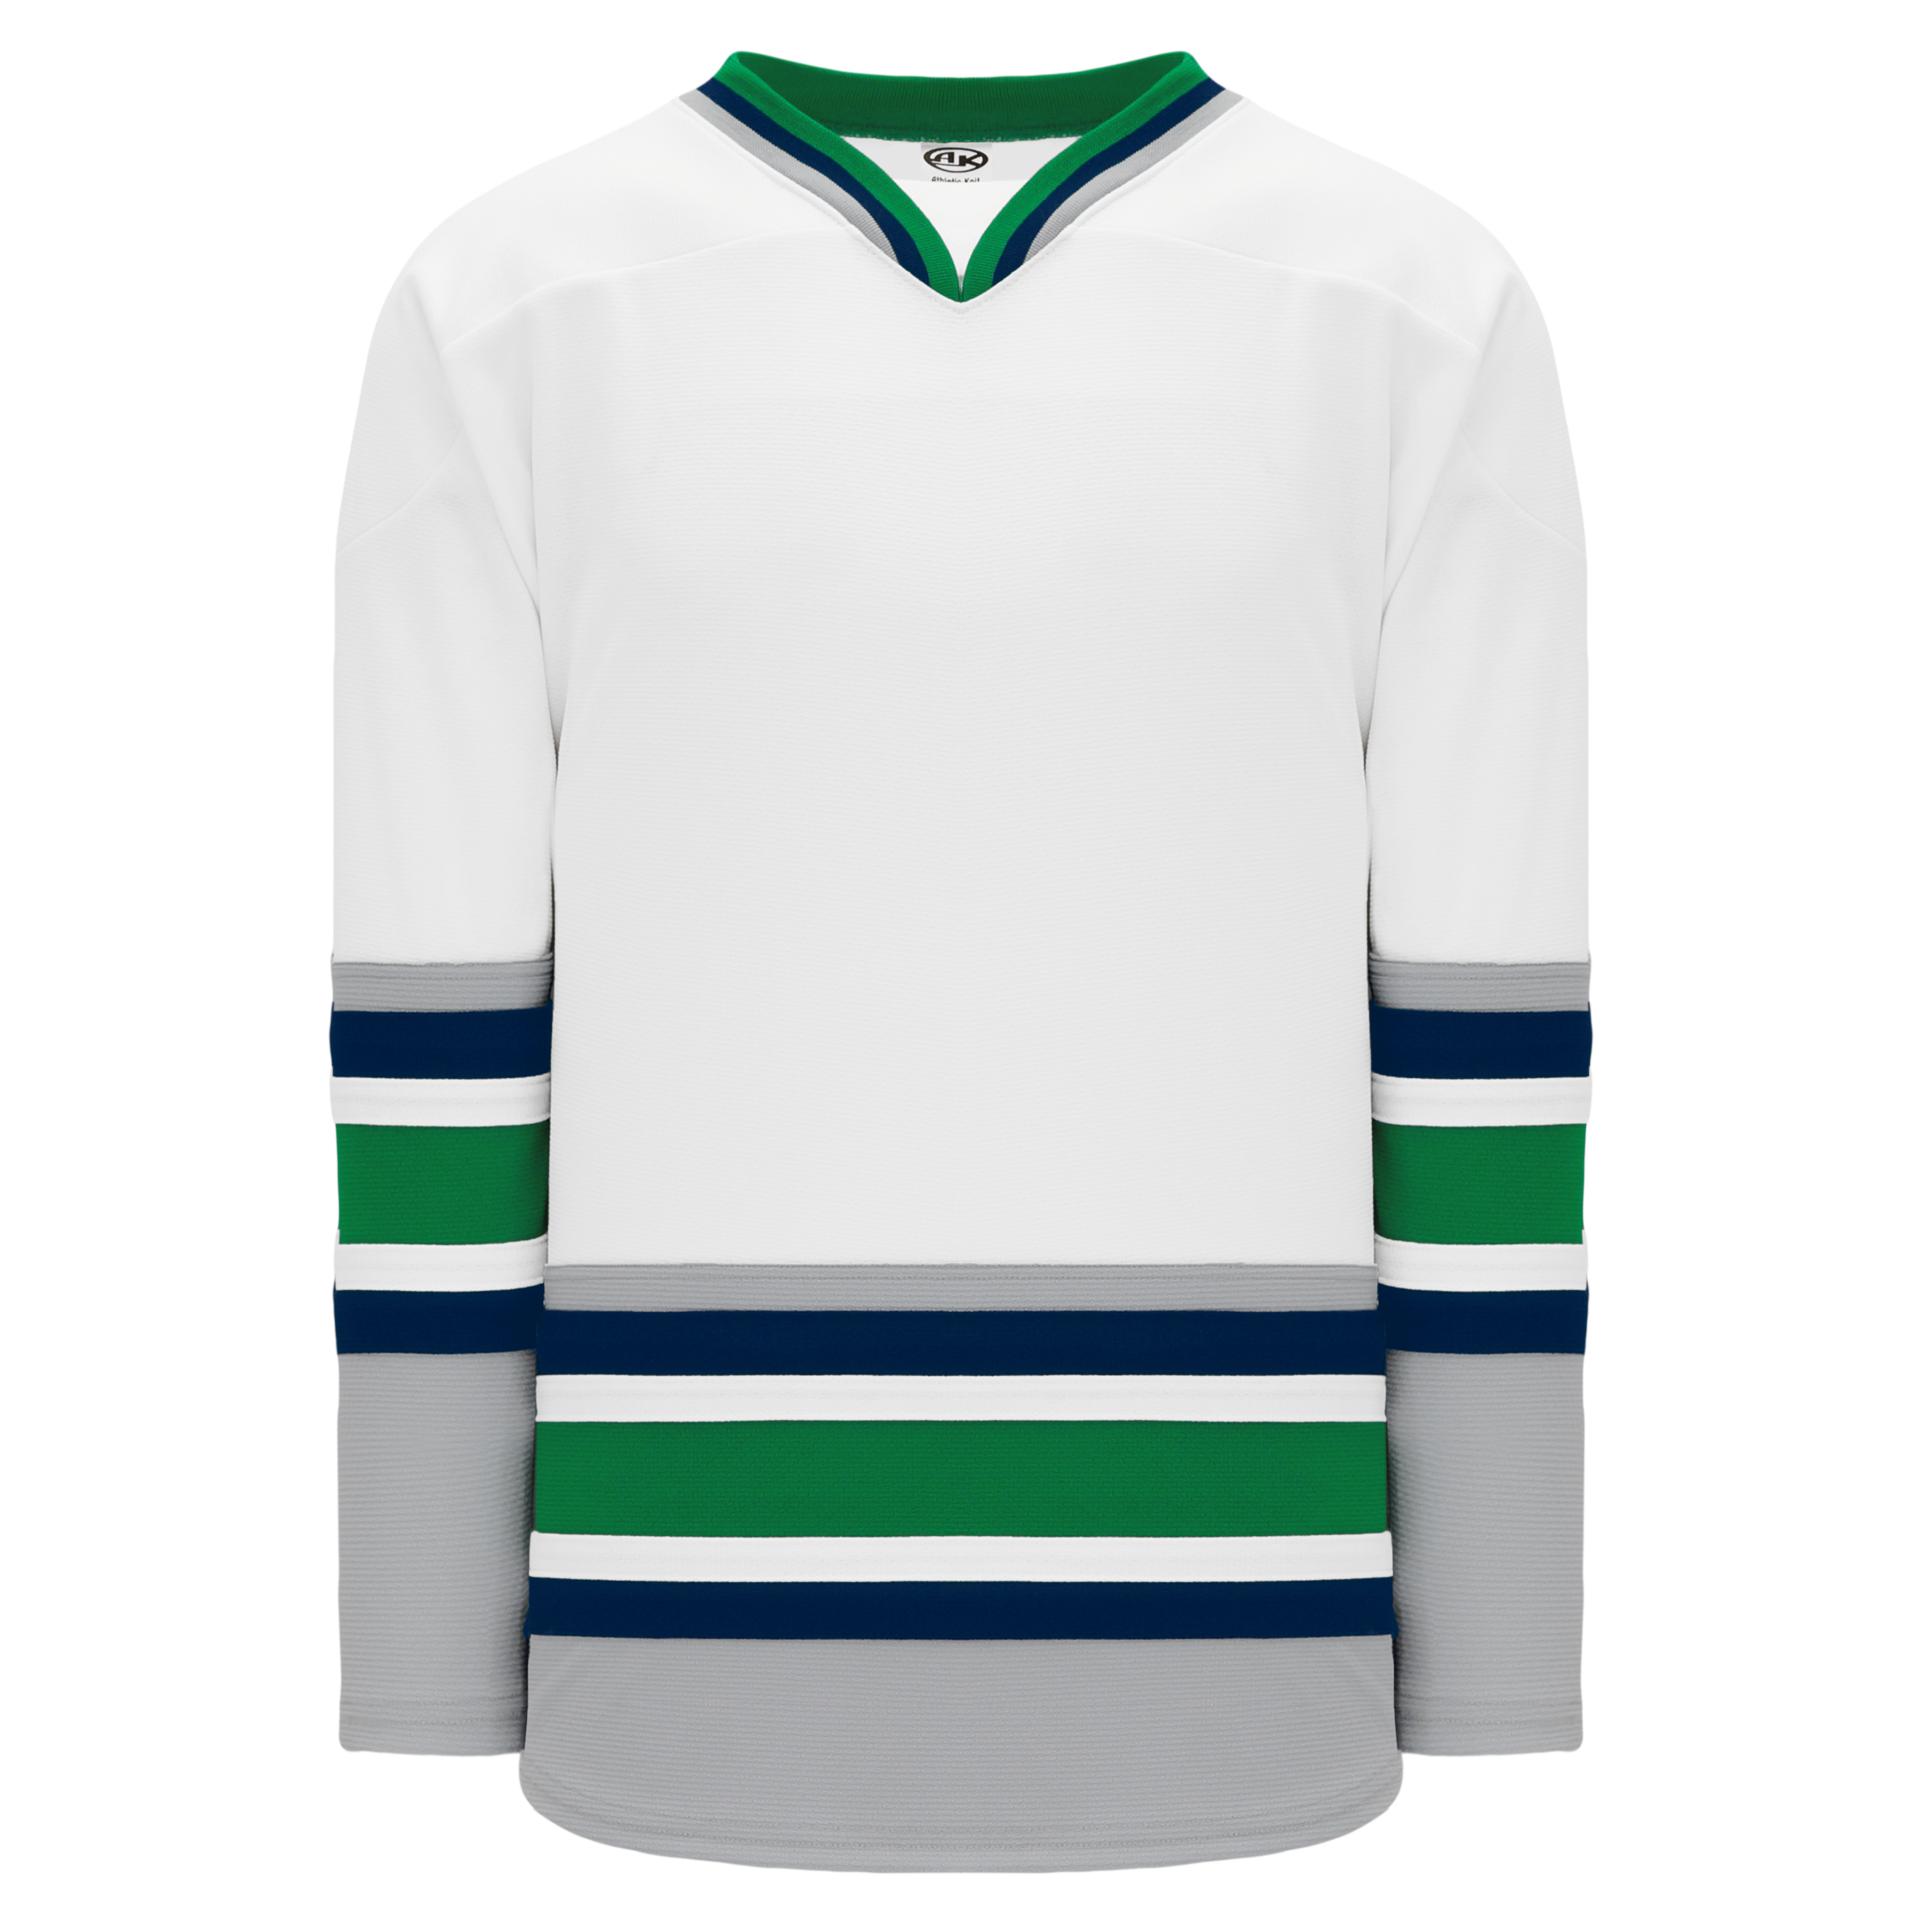 Hartford Whalers Jersey 